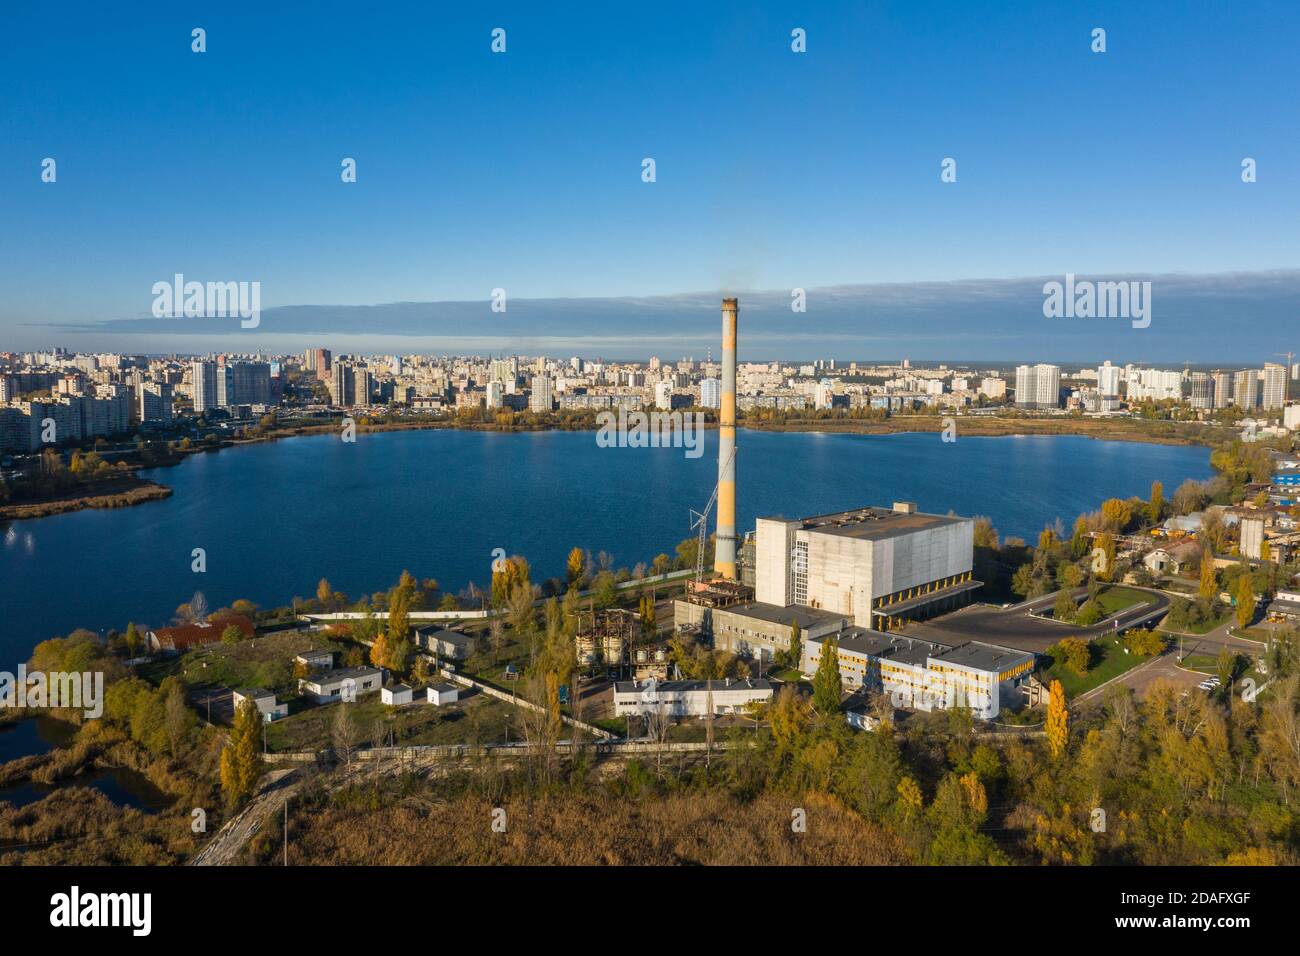 Waste incineration plant in the city near the lake. Stock Photo